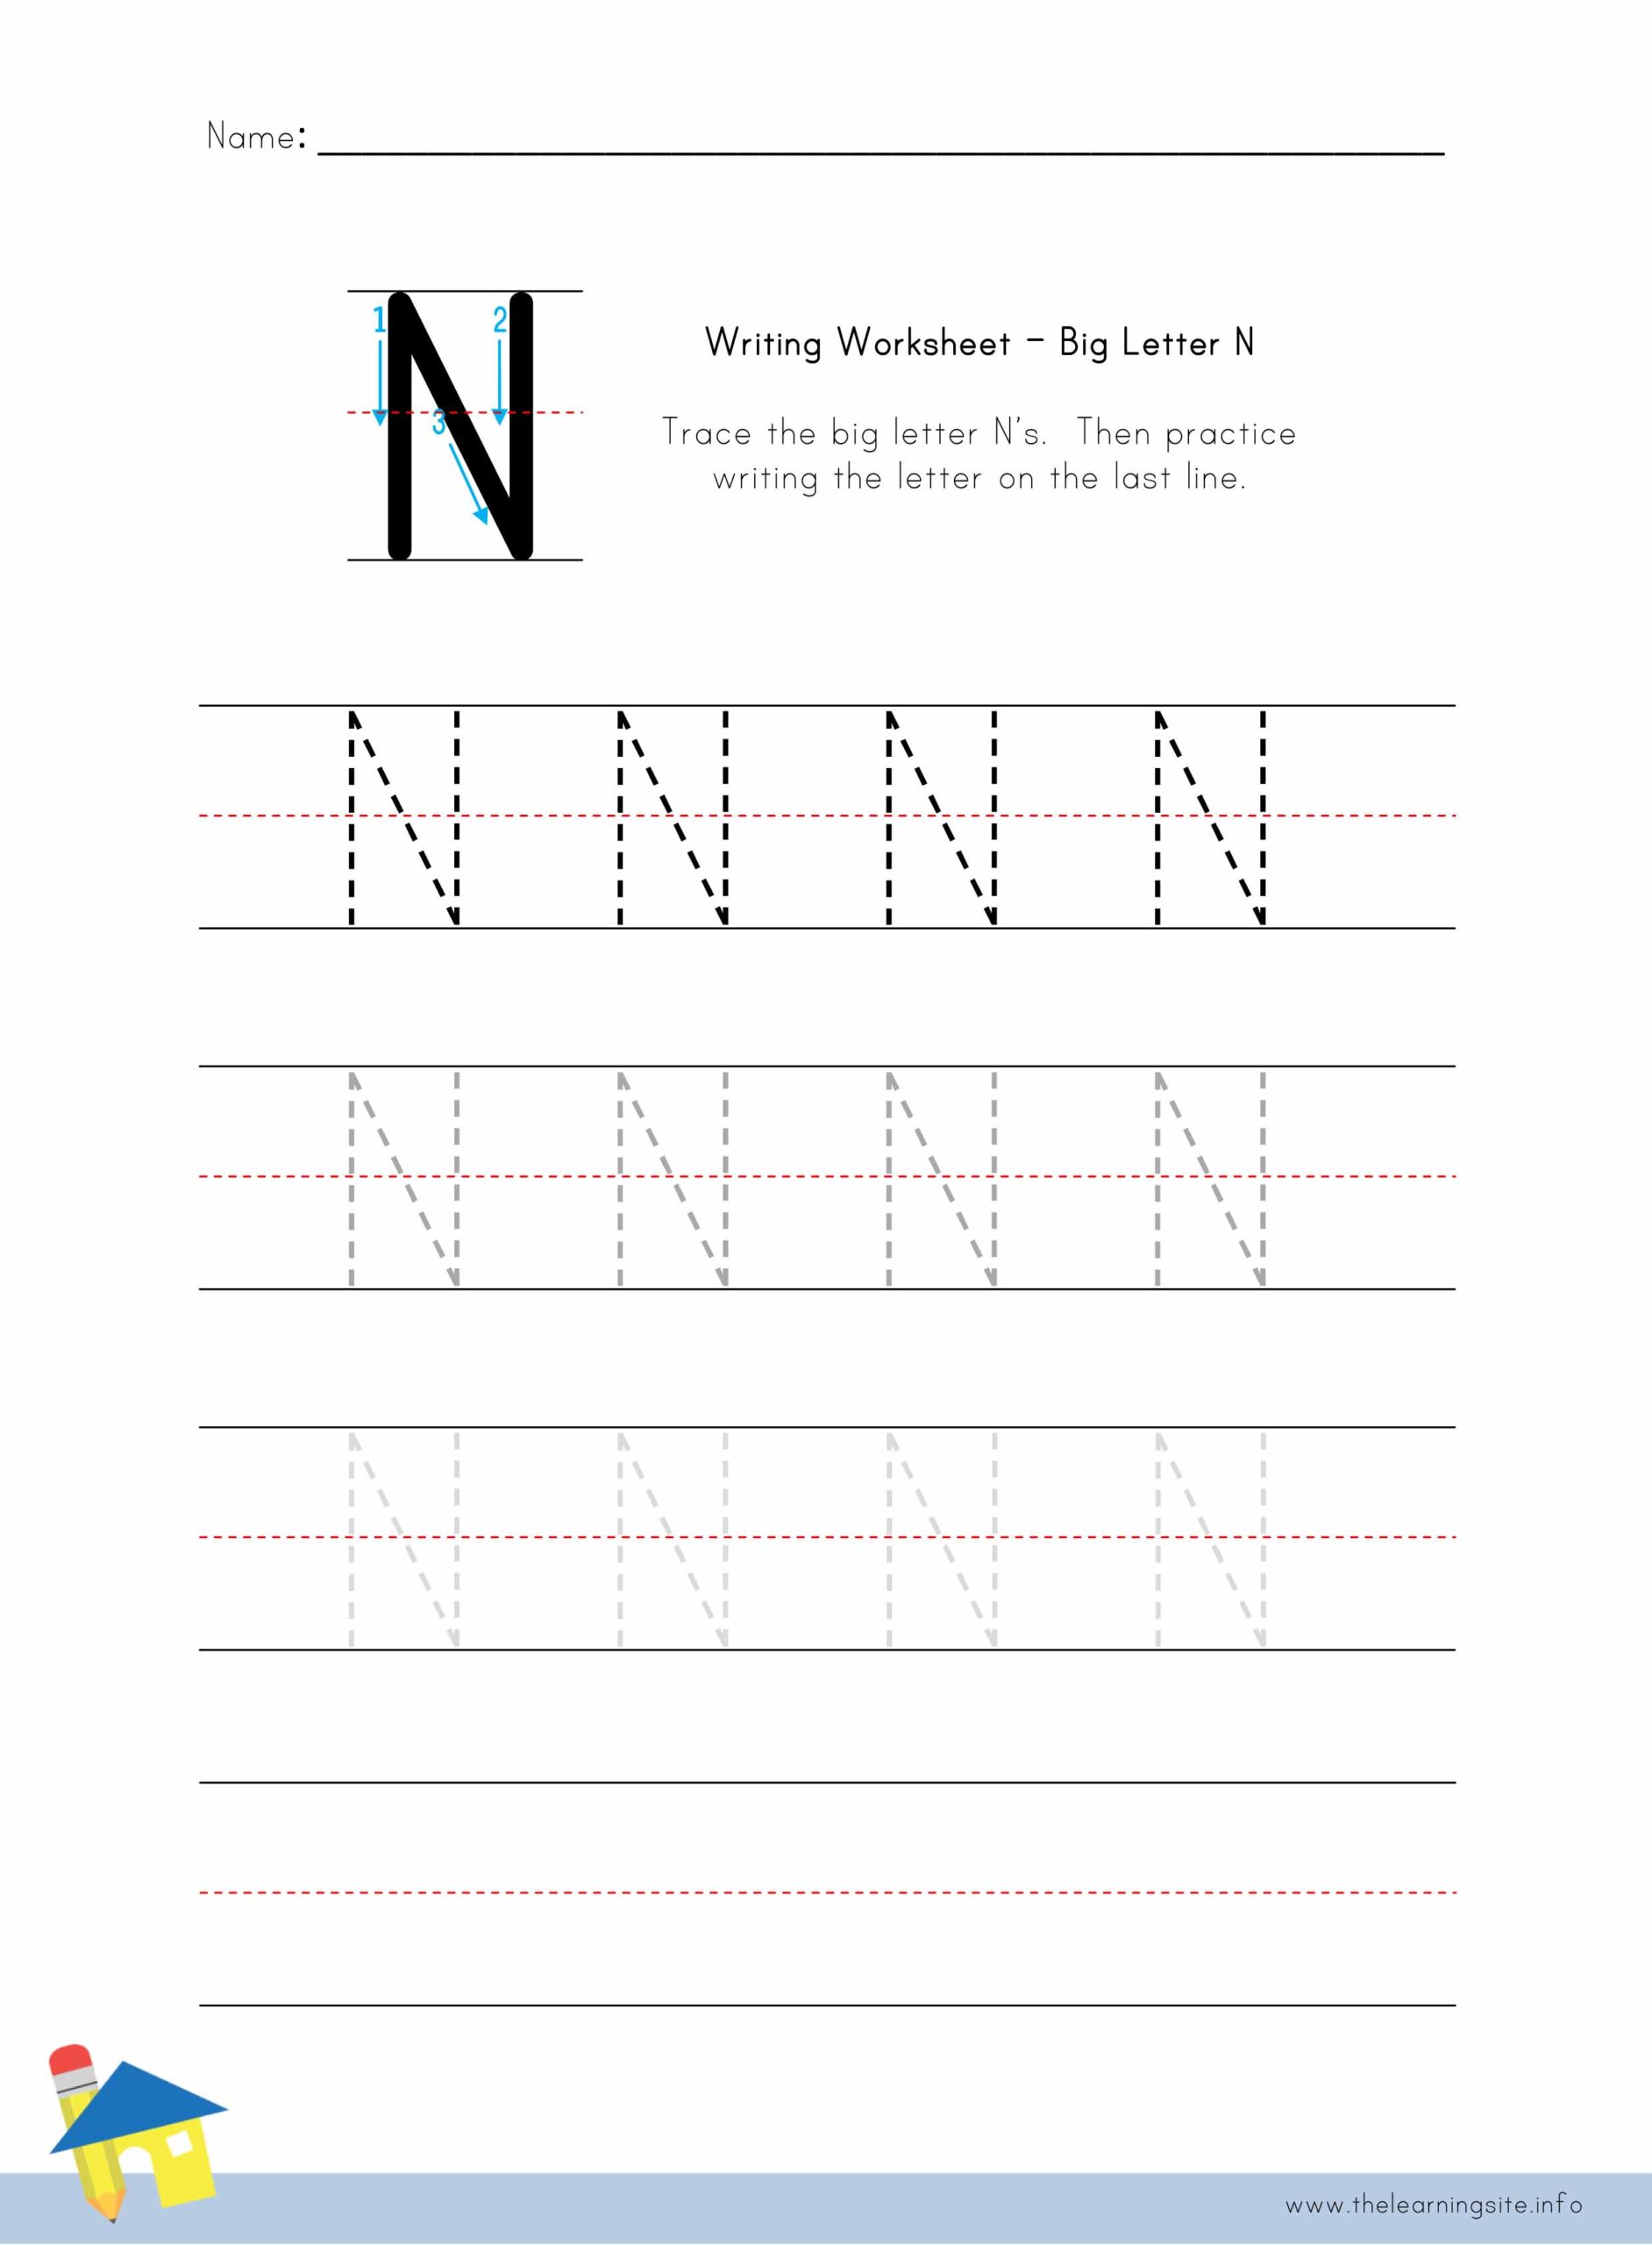 Big Letter N Writing Worksheet – The Learning Site